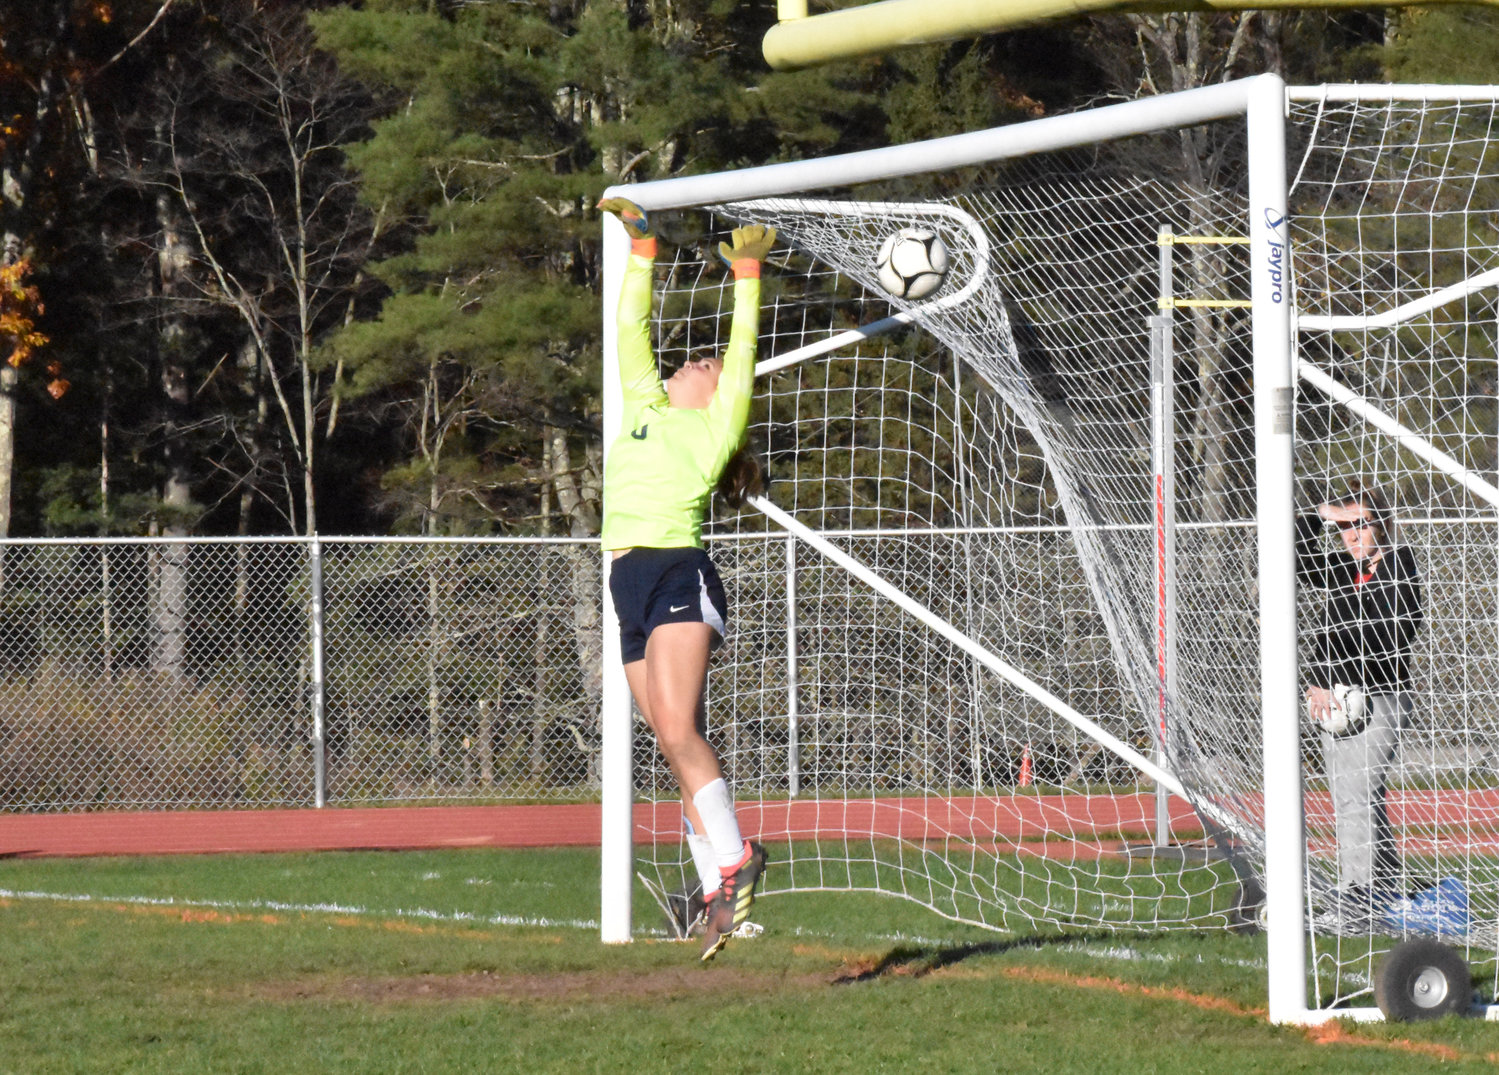 Kendall McGregor’s direct kick lofted perfectly to the top of the net for her second goal of the game in the 6-2 sectional win over Burke Catholic.